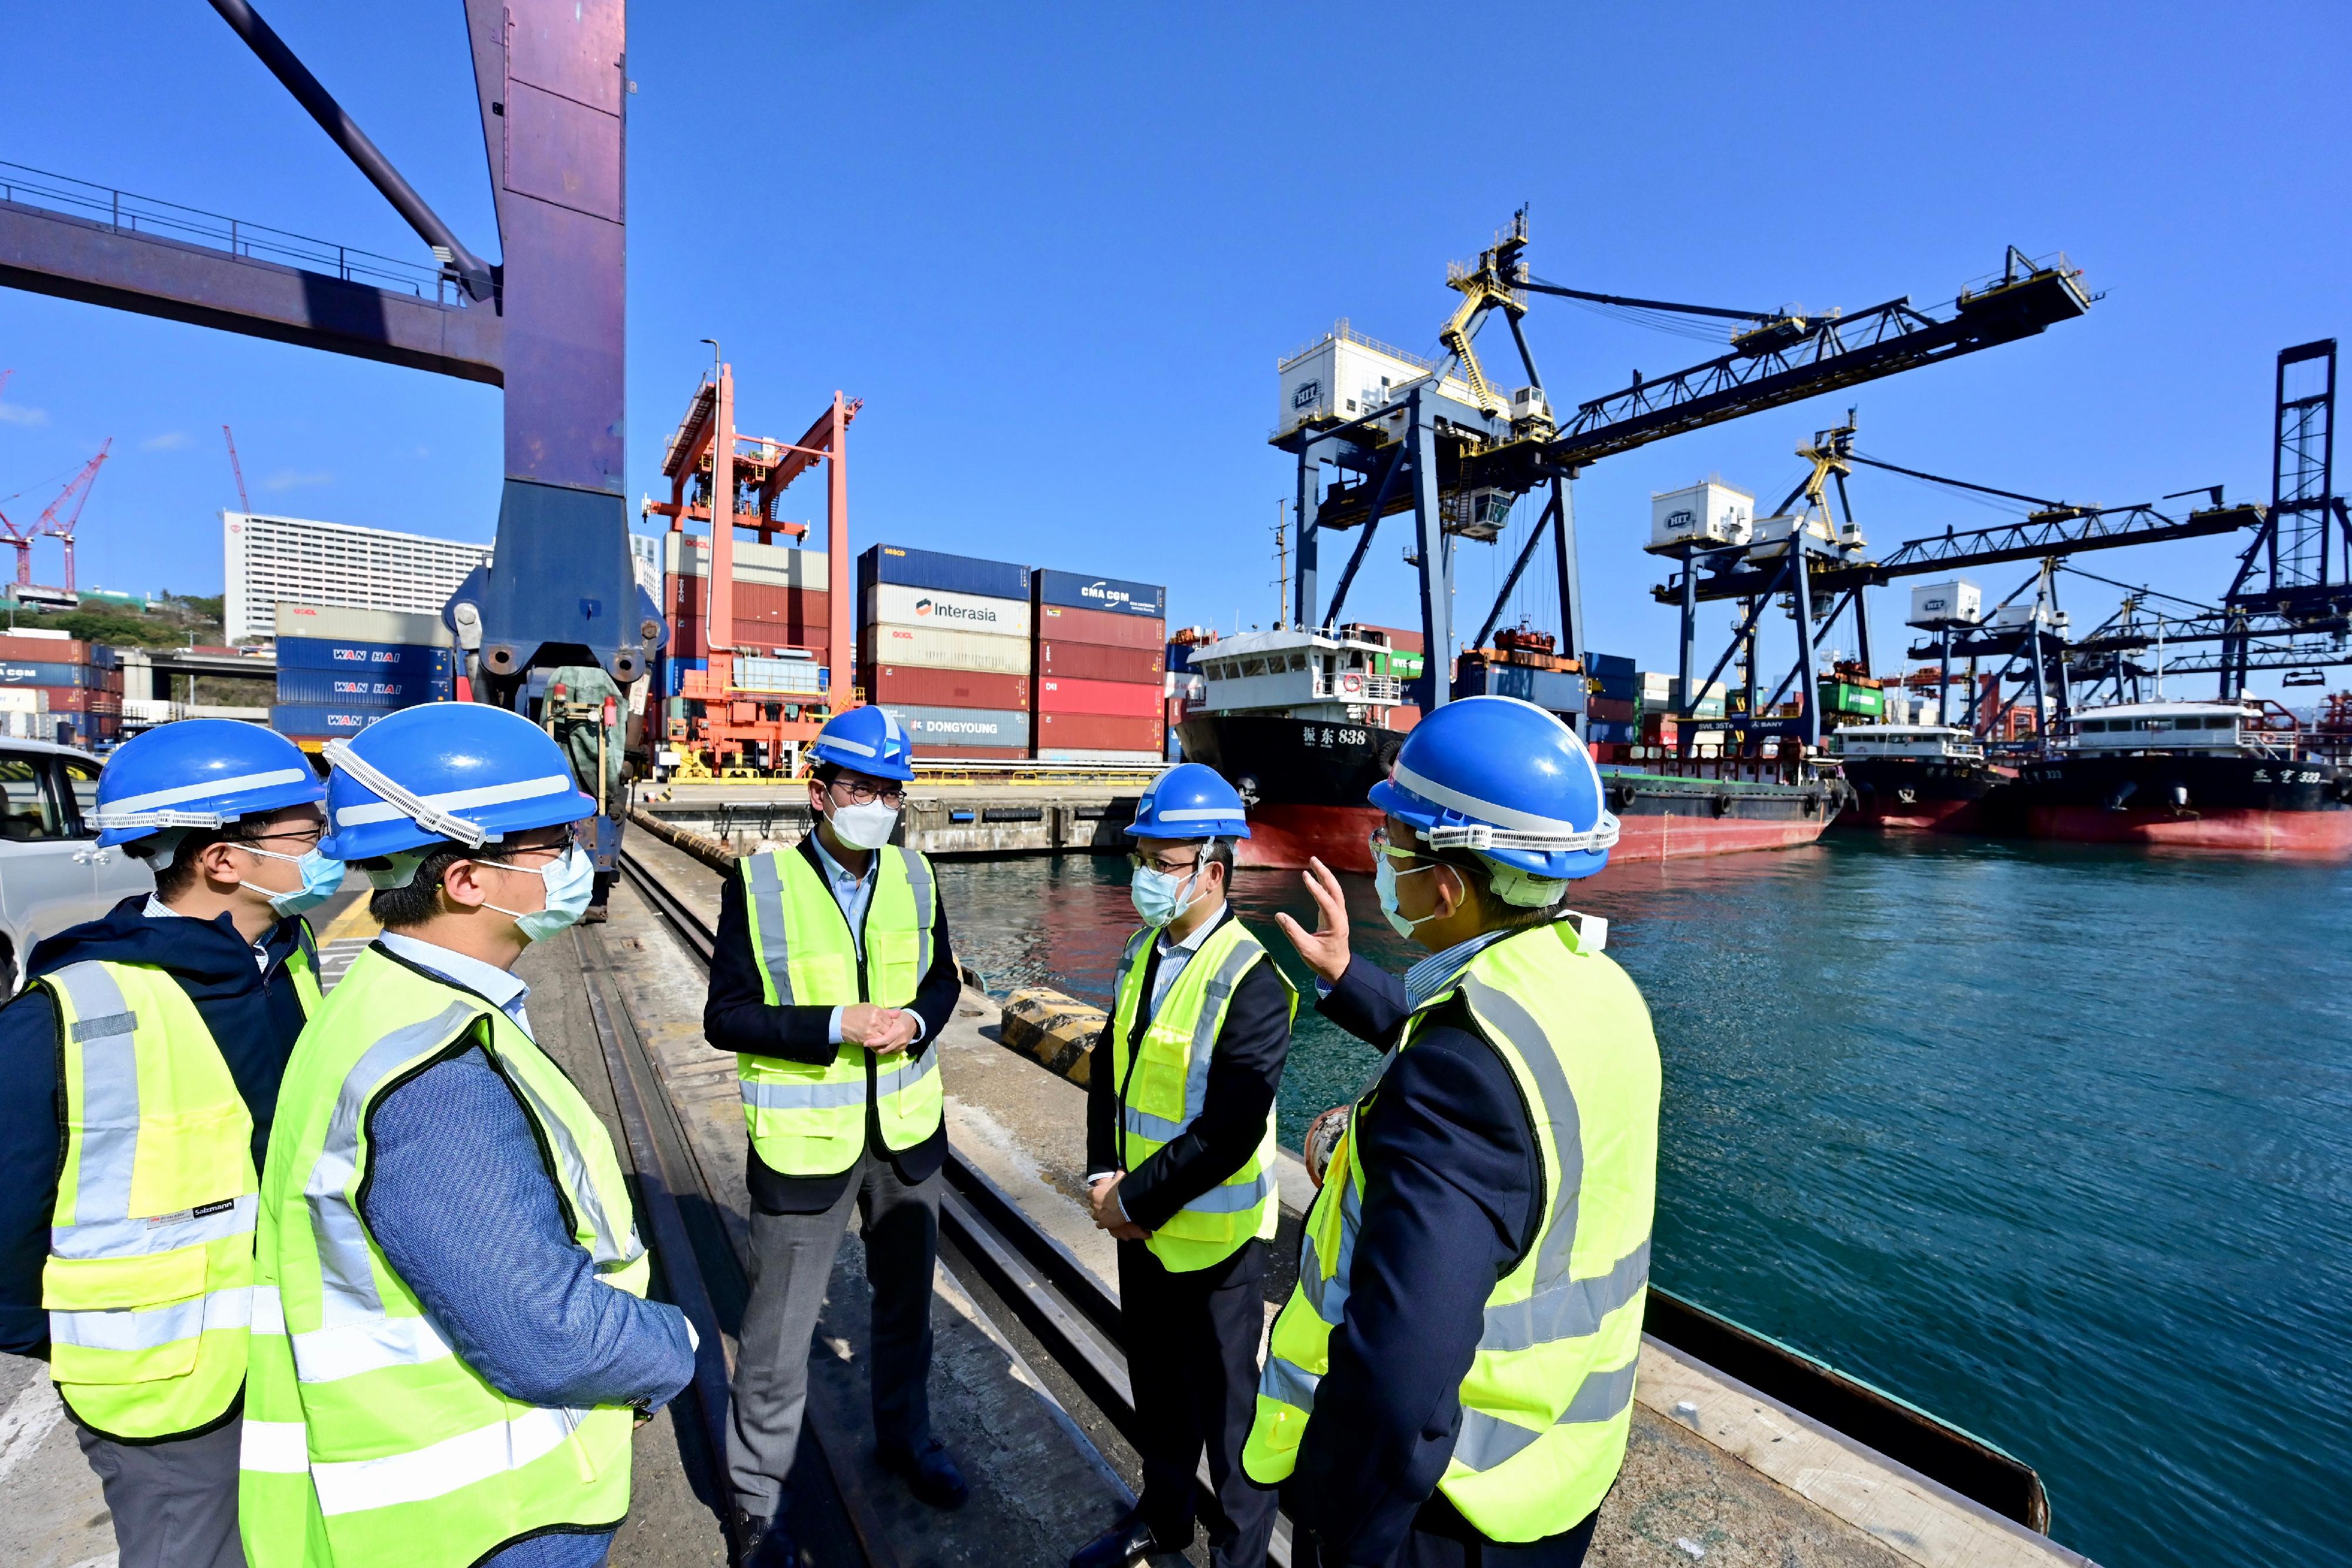 The Government has enhanced the overall transportation capacity of water and land transport including railway transport for early arrival of medical supplies from the Mainland. Photo shows the Secretary for Commerce and Economic Development, Mr Edward Yau (centre), today (March 10) visiting the Kwai Tsing Container Terminals to view the logistics arrangements for supplies delivered to Hong Kong.